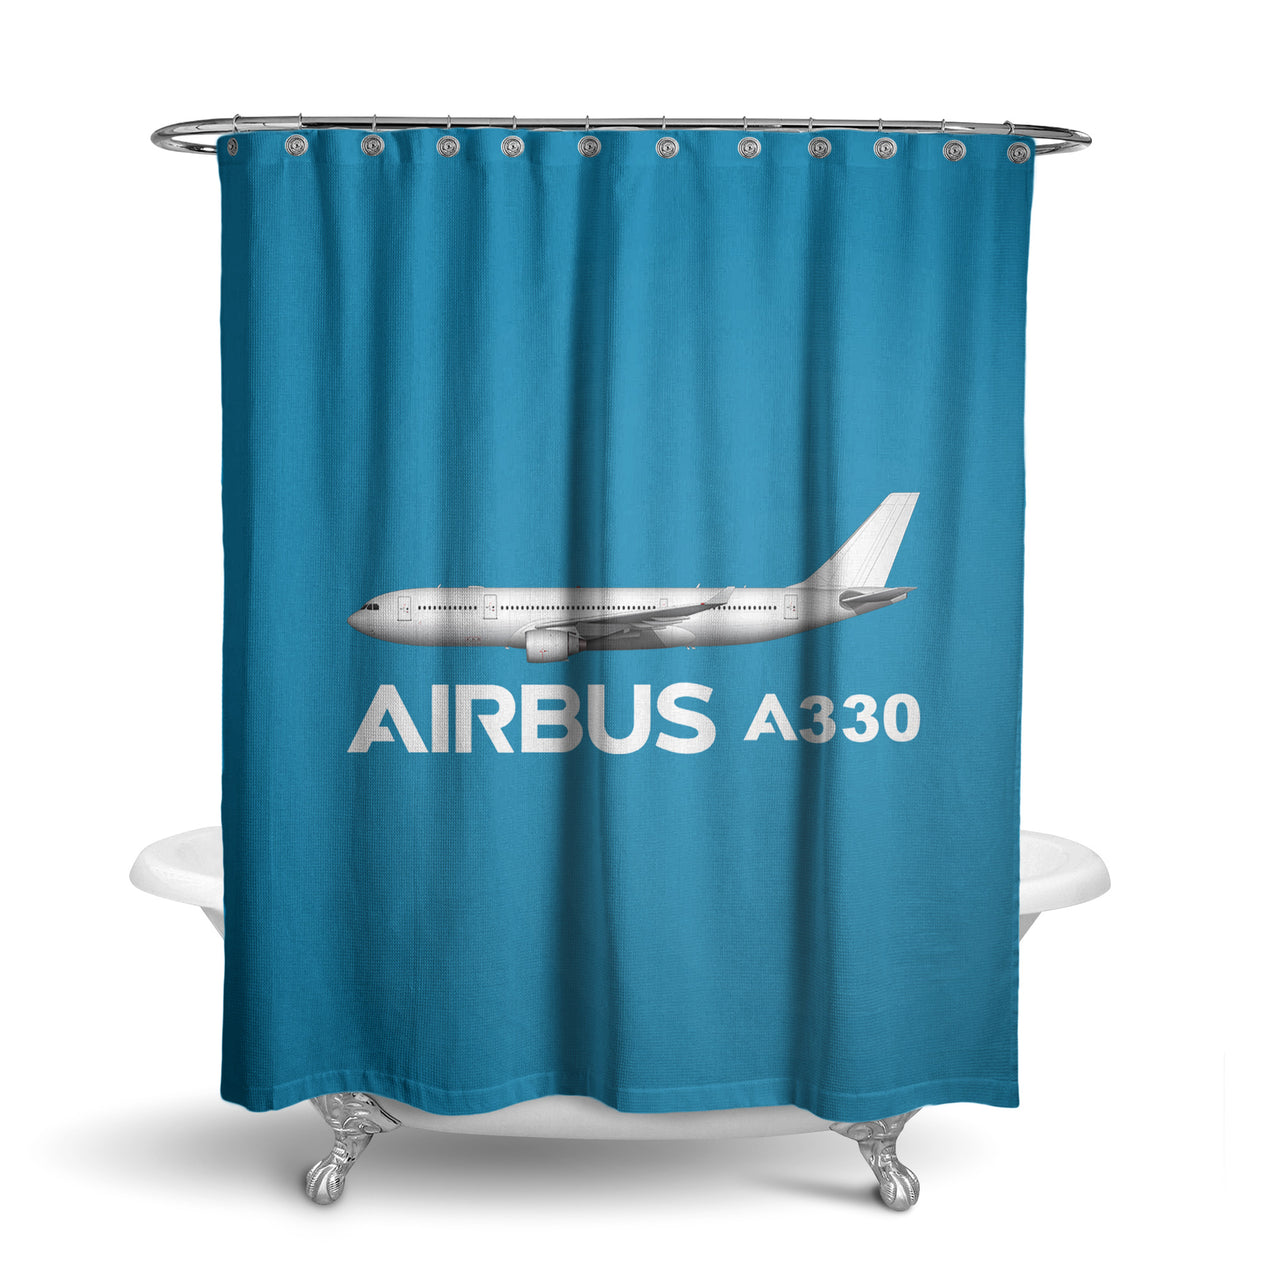 The Airbus A330 Designed Shower Curtains